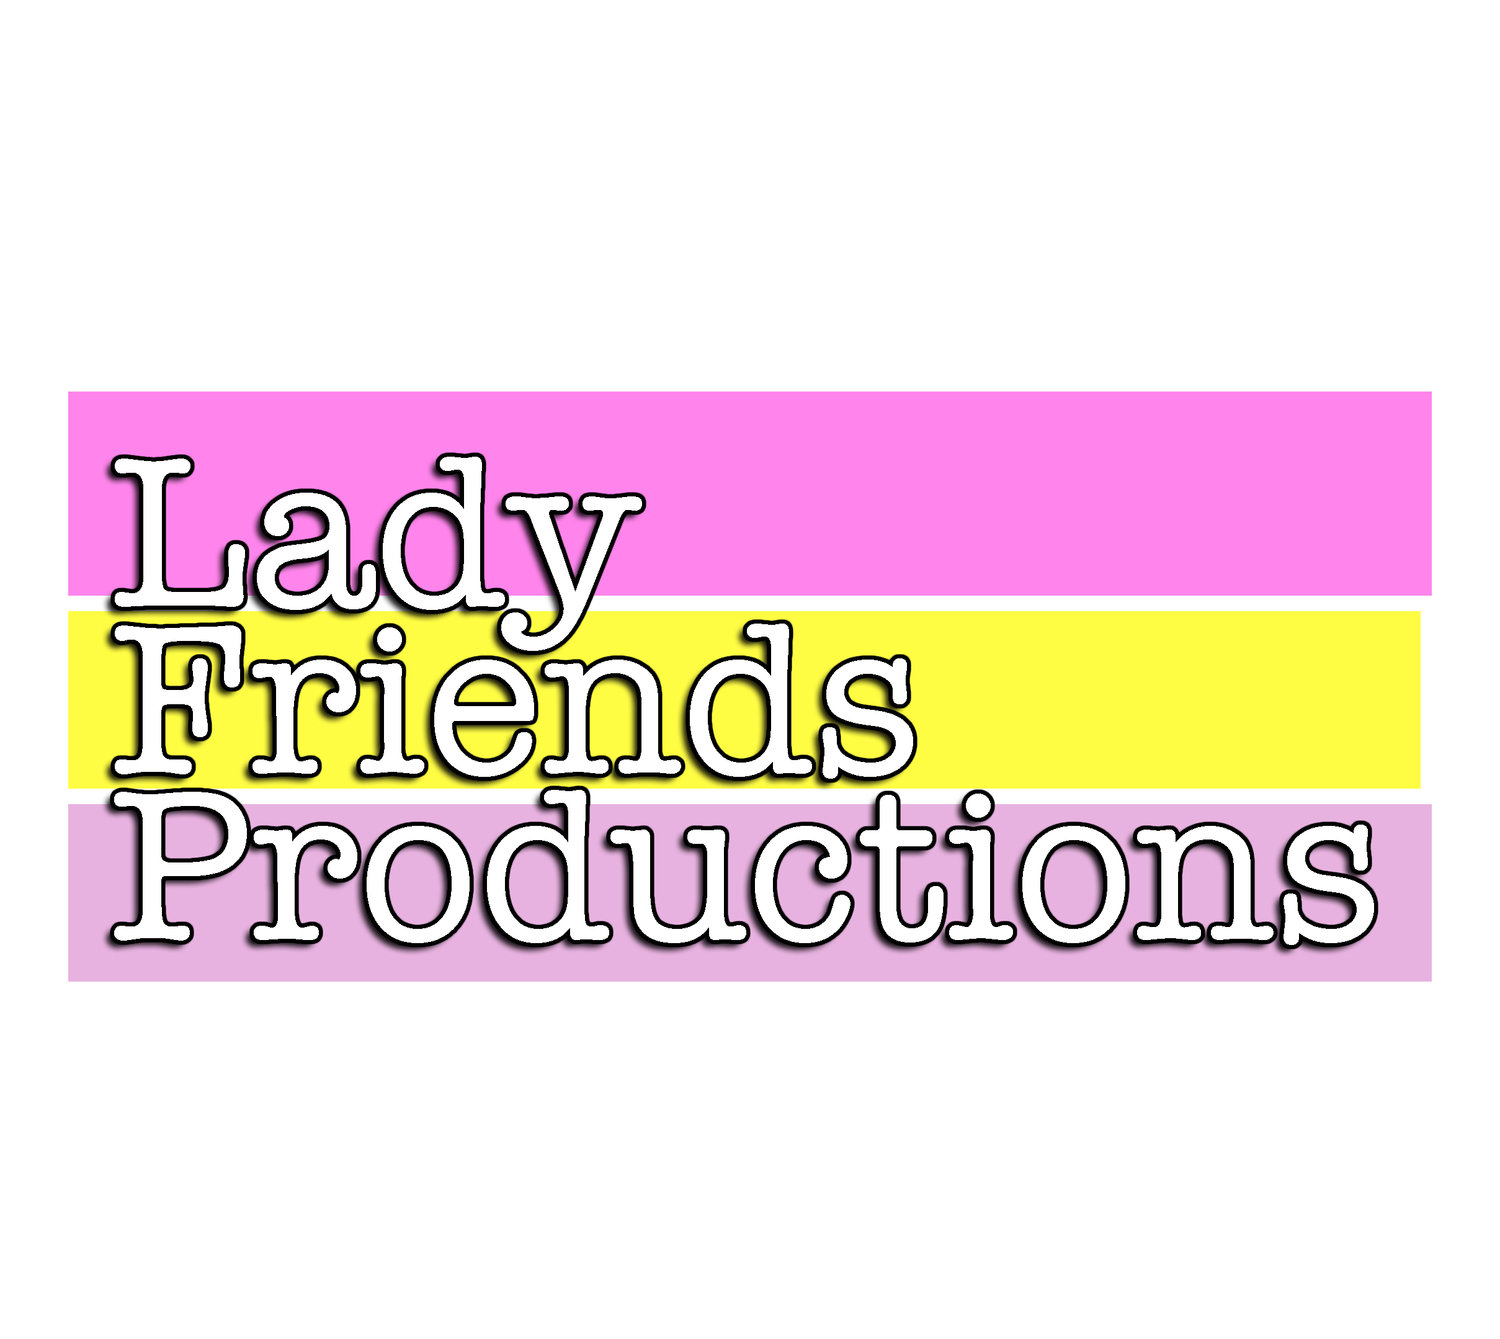 Lady Friends Productions